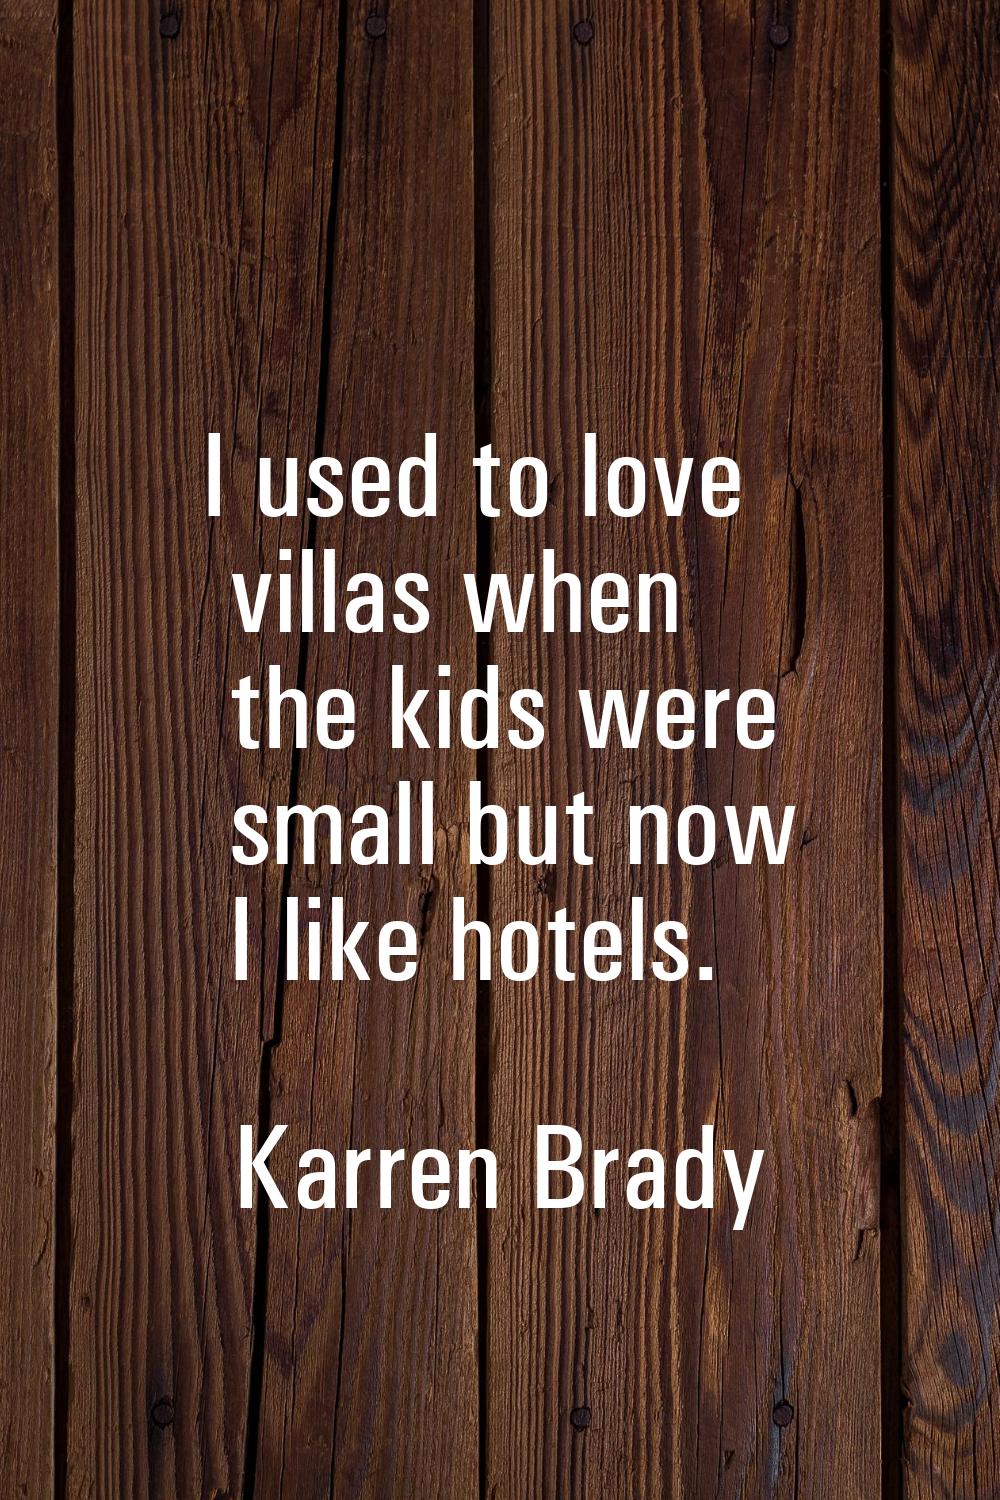 I used to love villas when the kids were small but now I like hotels.